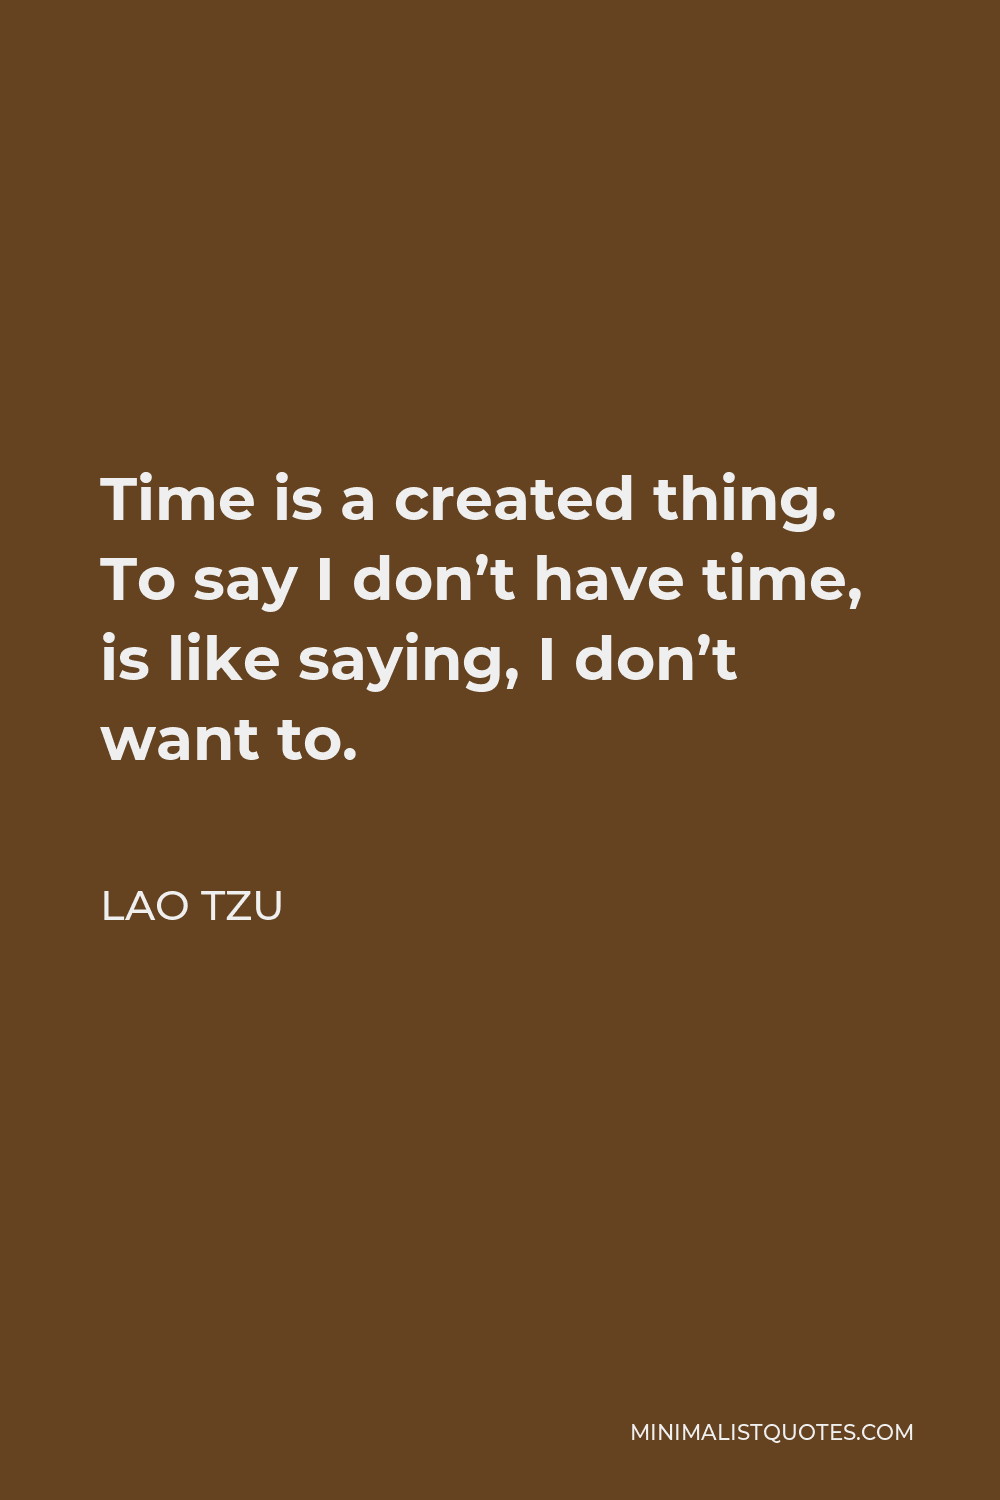 Lao Tzu Quote - Time is a created thing. To say I don’t have time, is like saying, I don’t want to.